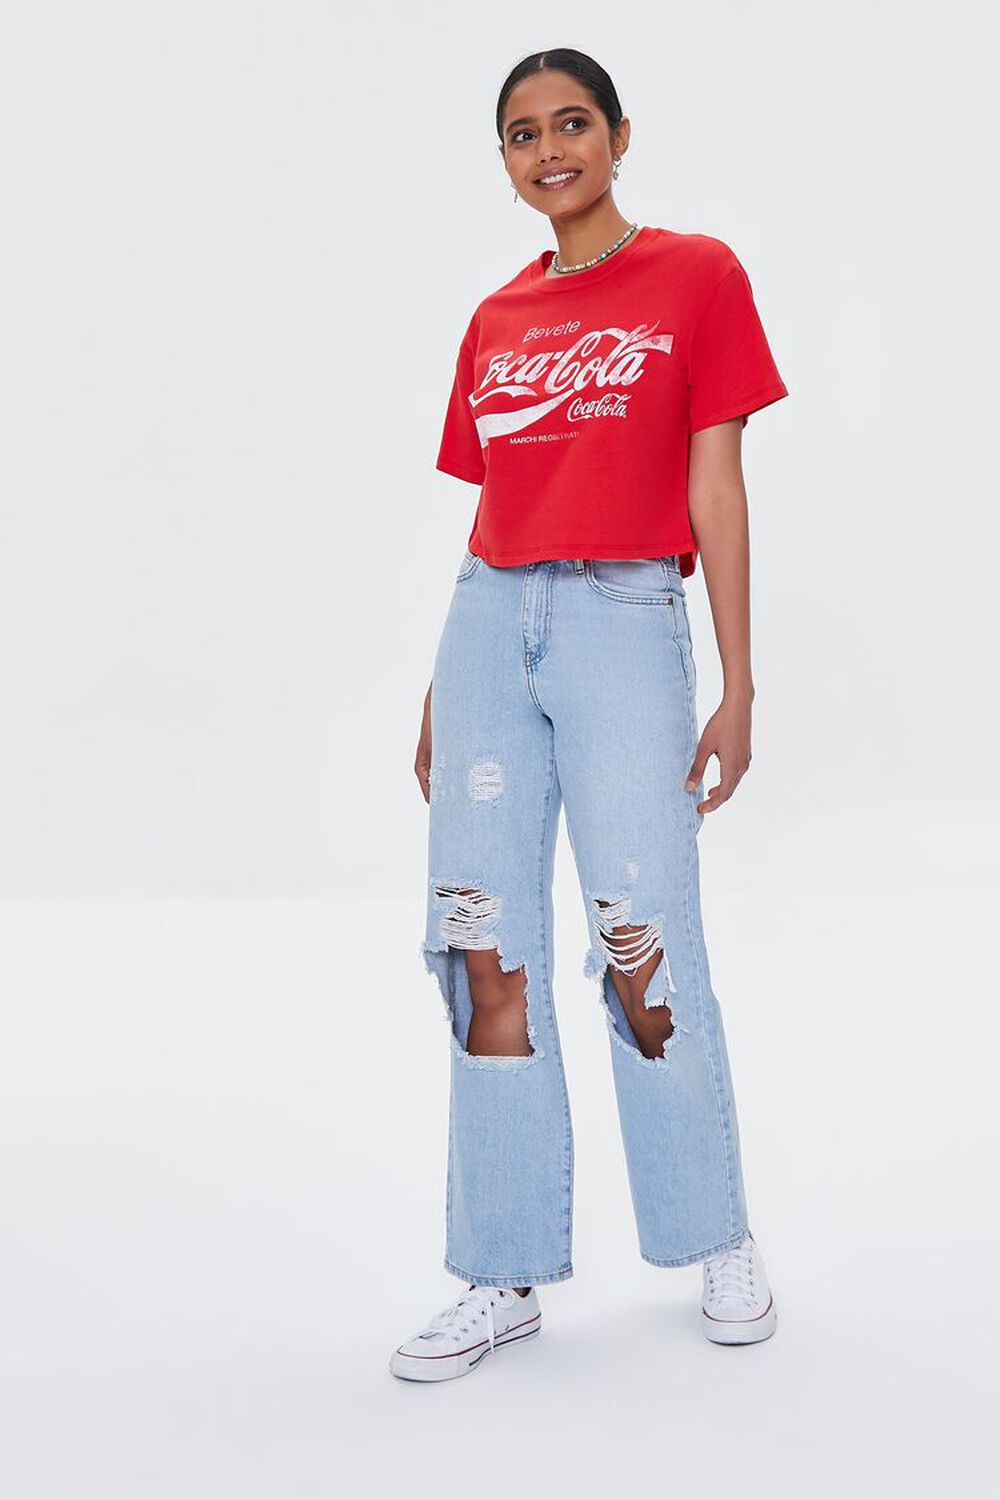 Coca-Cola Graphic Cropped Tee